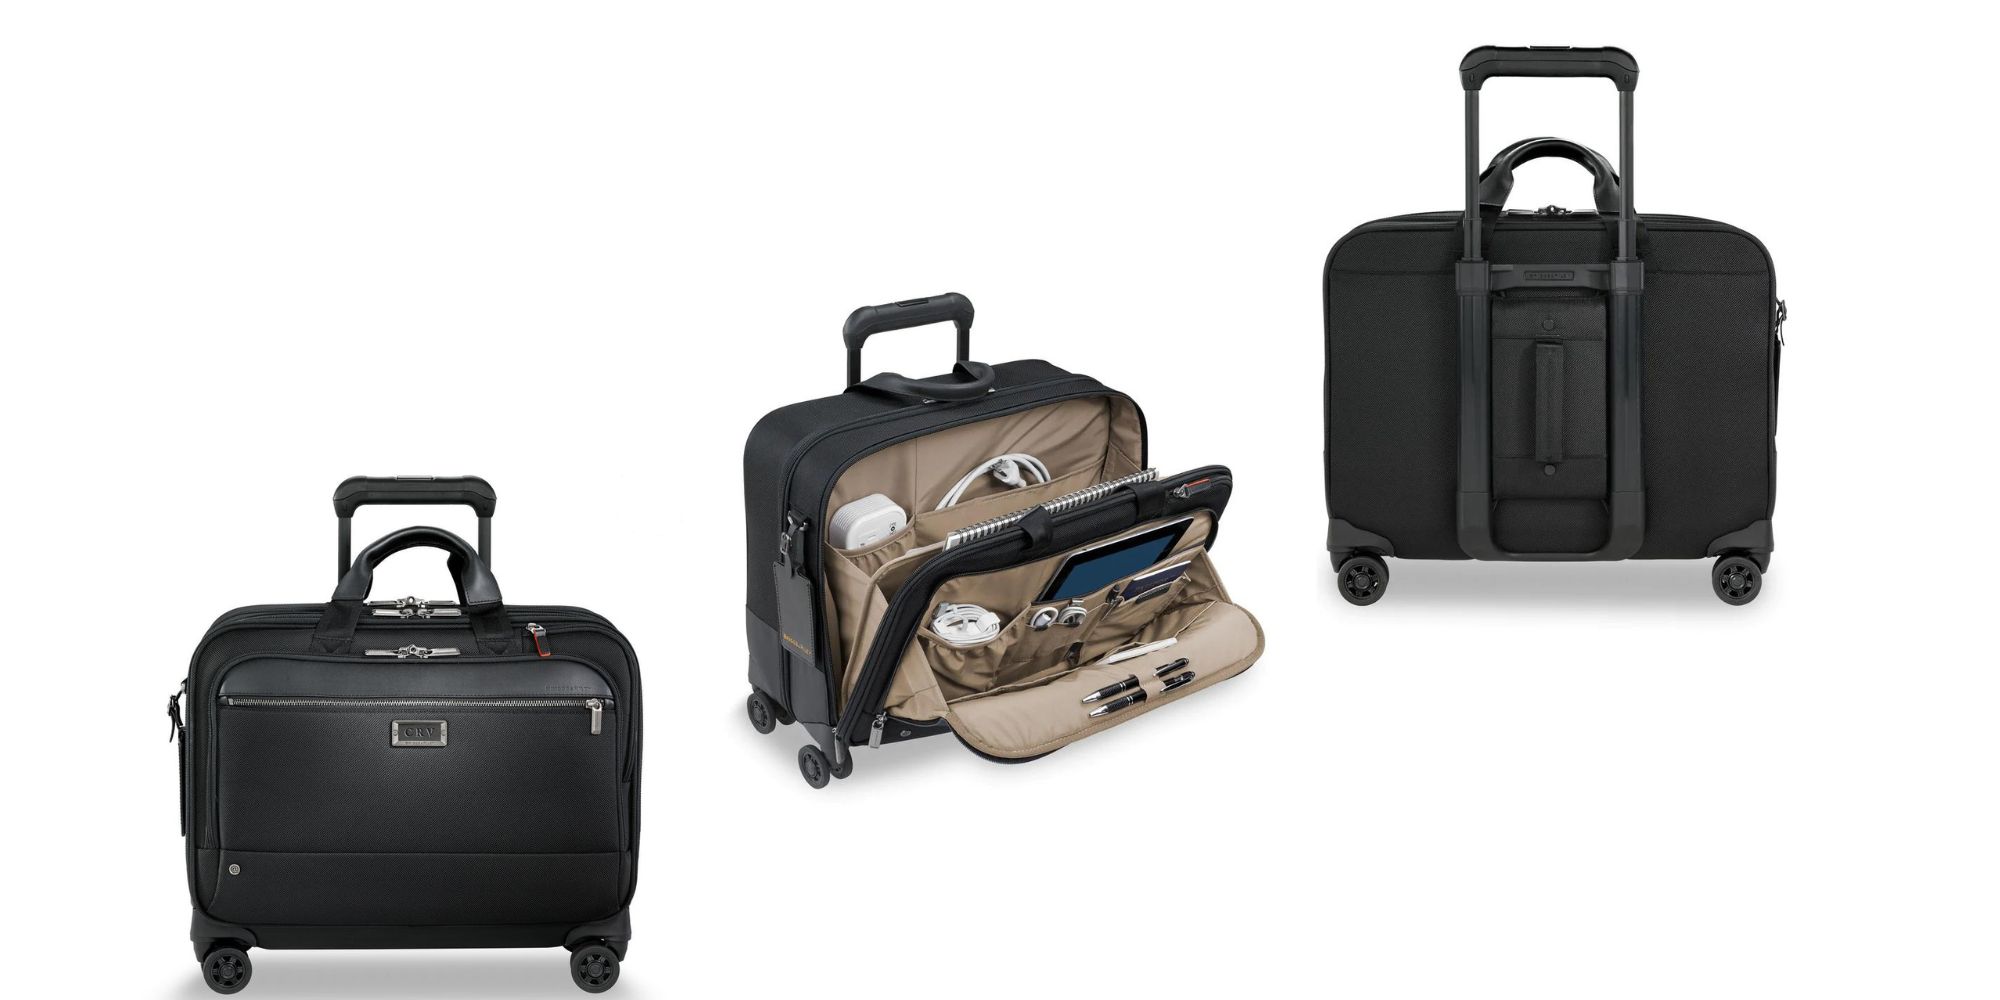 ✓The 5 Best Rolling Laptop Bags of 2023  Top 5 : Best Rolling Laptop Bags  in 2023 - Buying Guide 